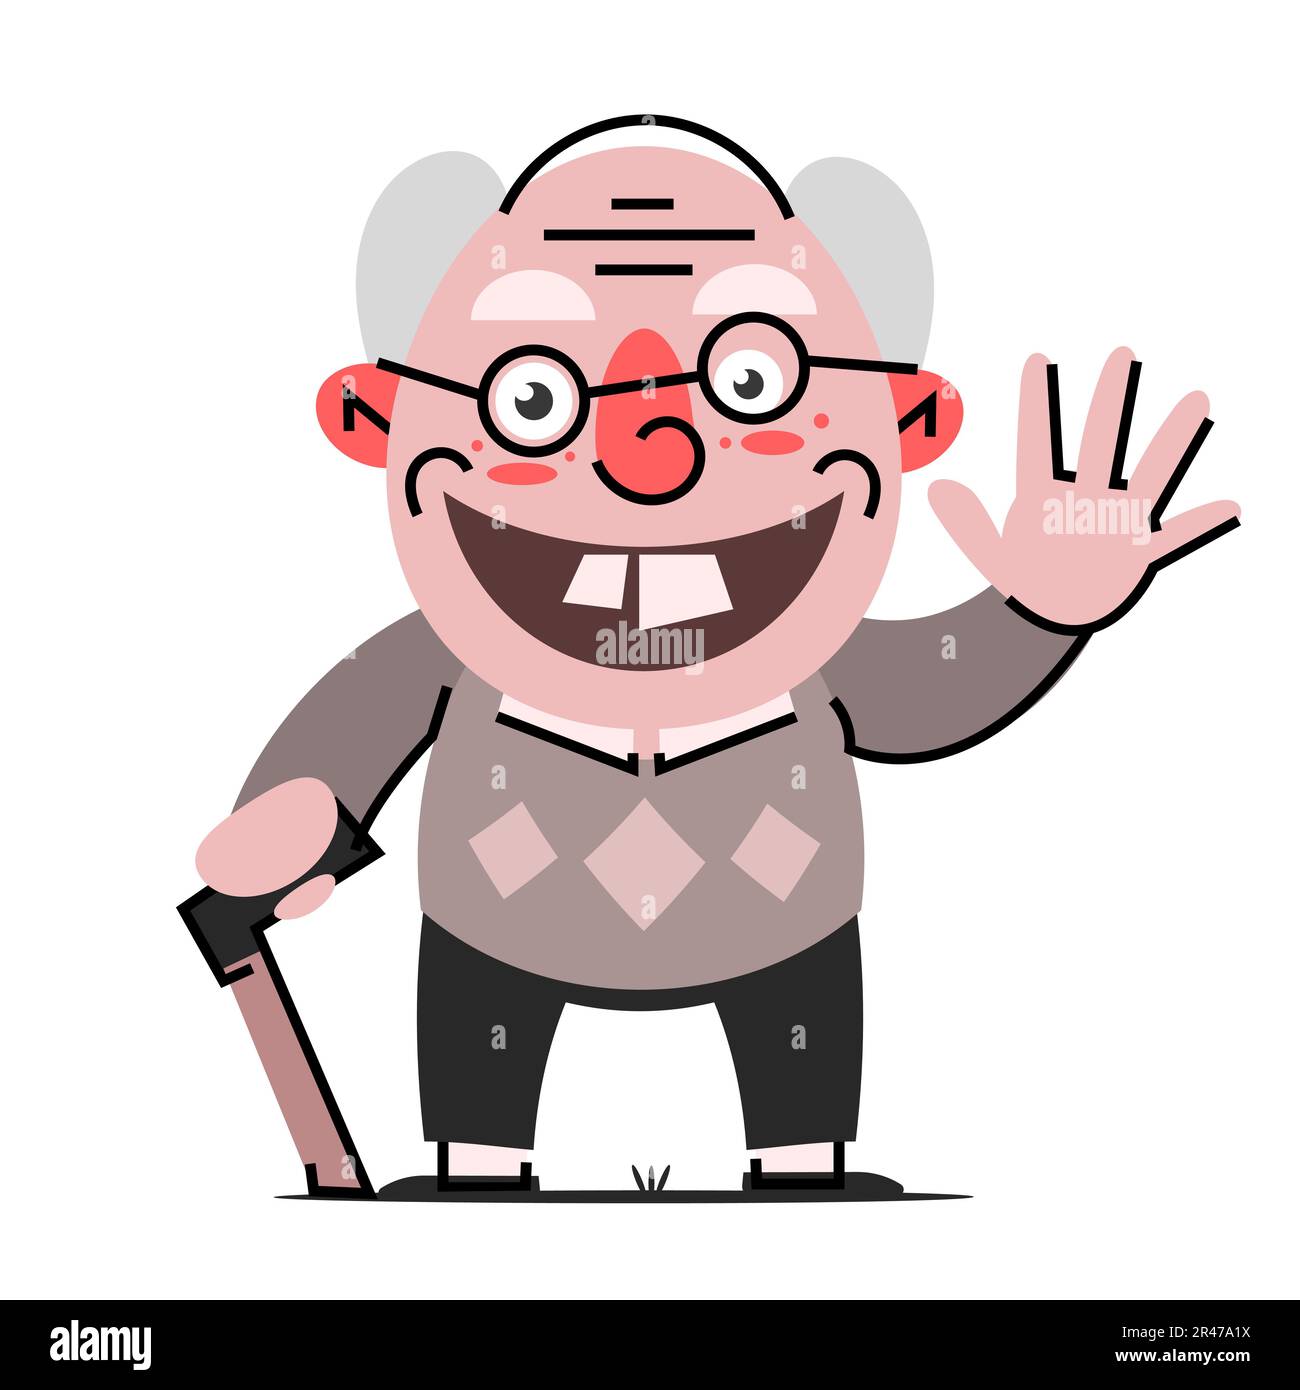 Funny illustration of old man cartoon character. Isolated illustration. Stock Vector